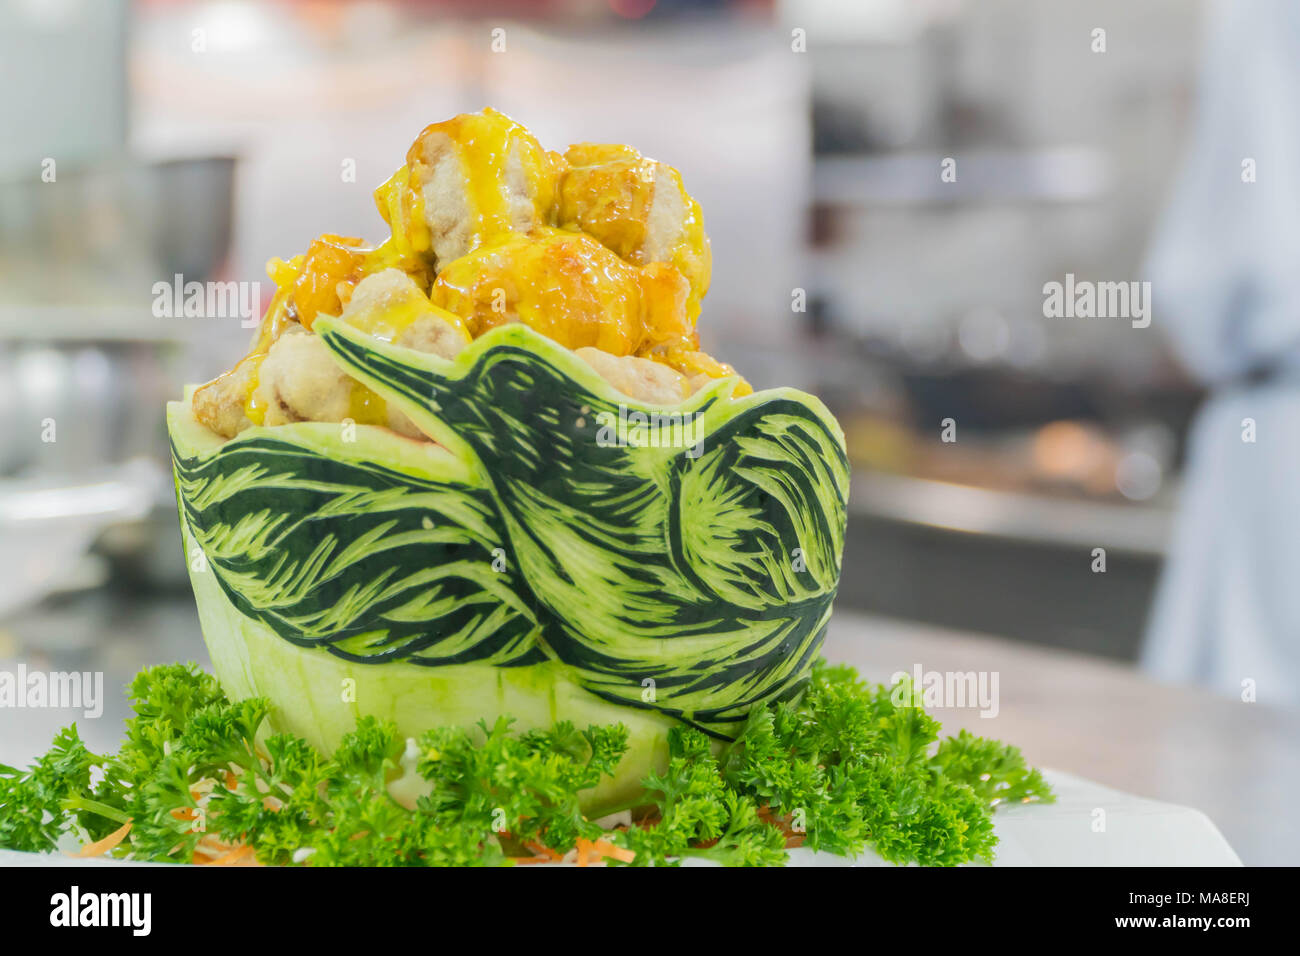 Fried chicken in watermelon Carving swan. Stock Photo